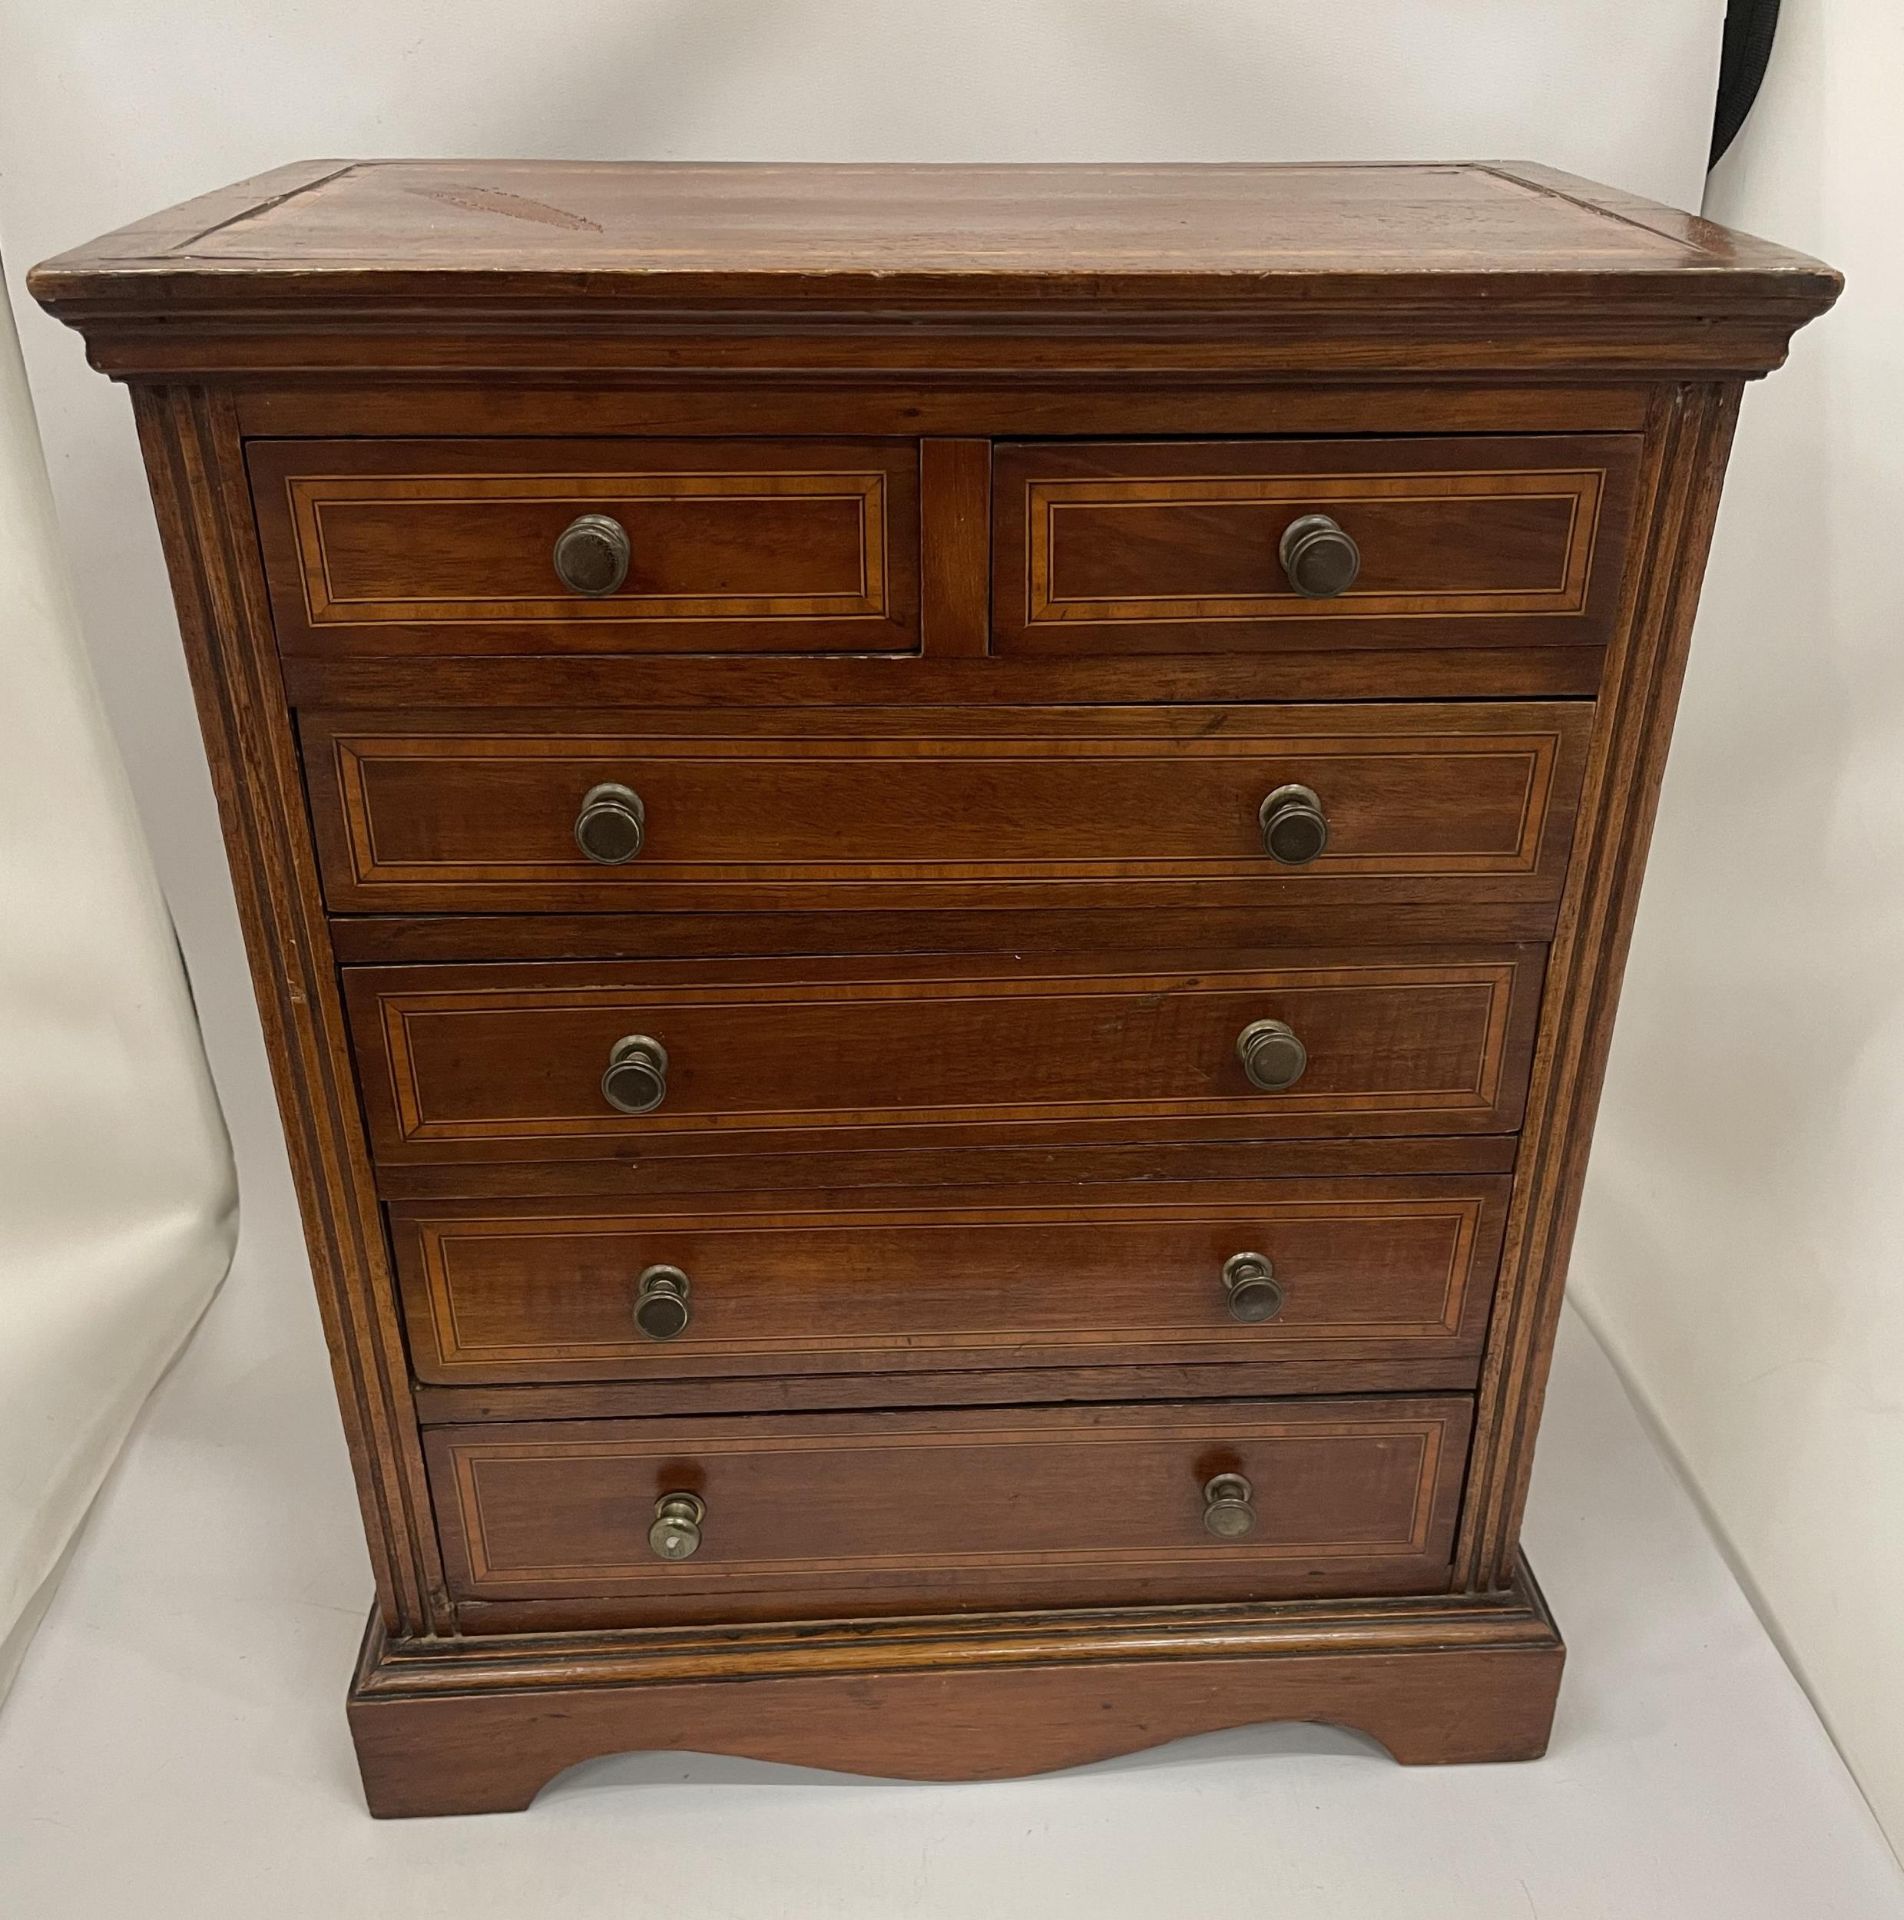 AN EDWARDIAN INLAID MAHOGANY APPRENTICE CHEST OF DRAWERS COMPRISING TWO SHORT OVER FOUR LONG